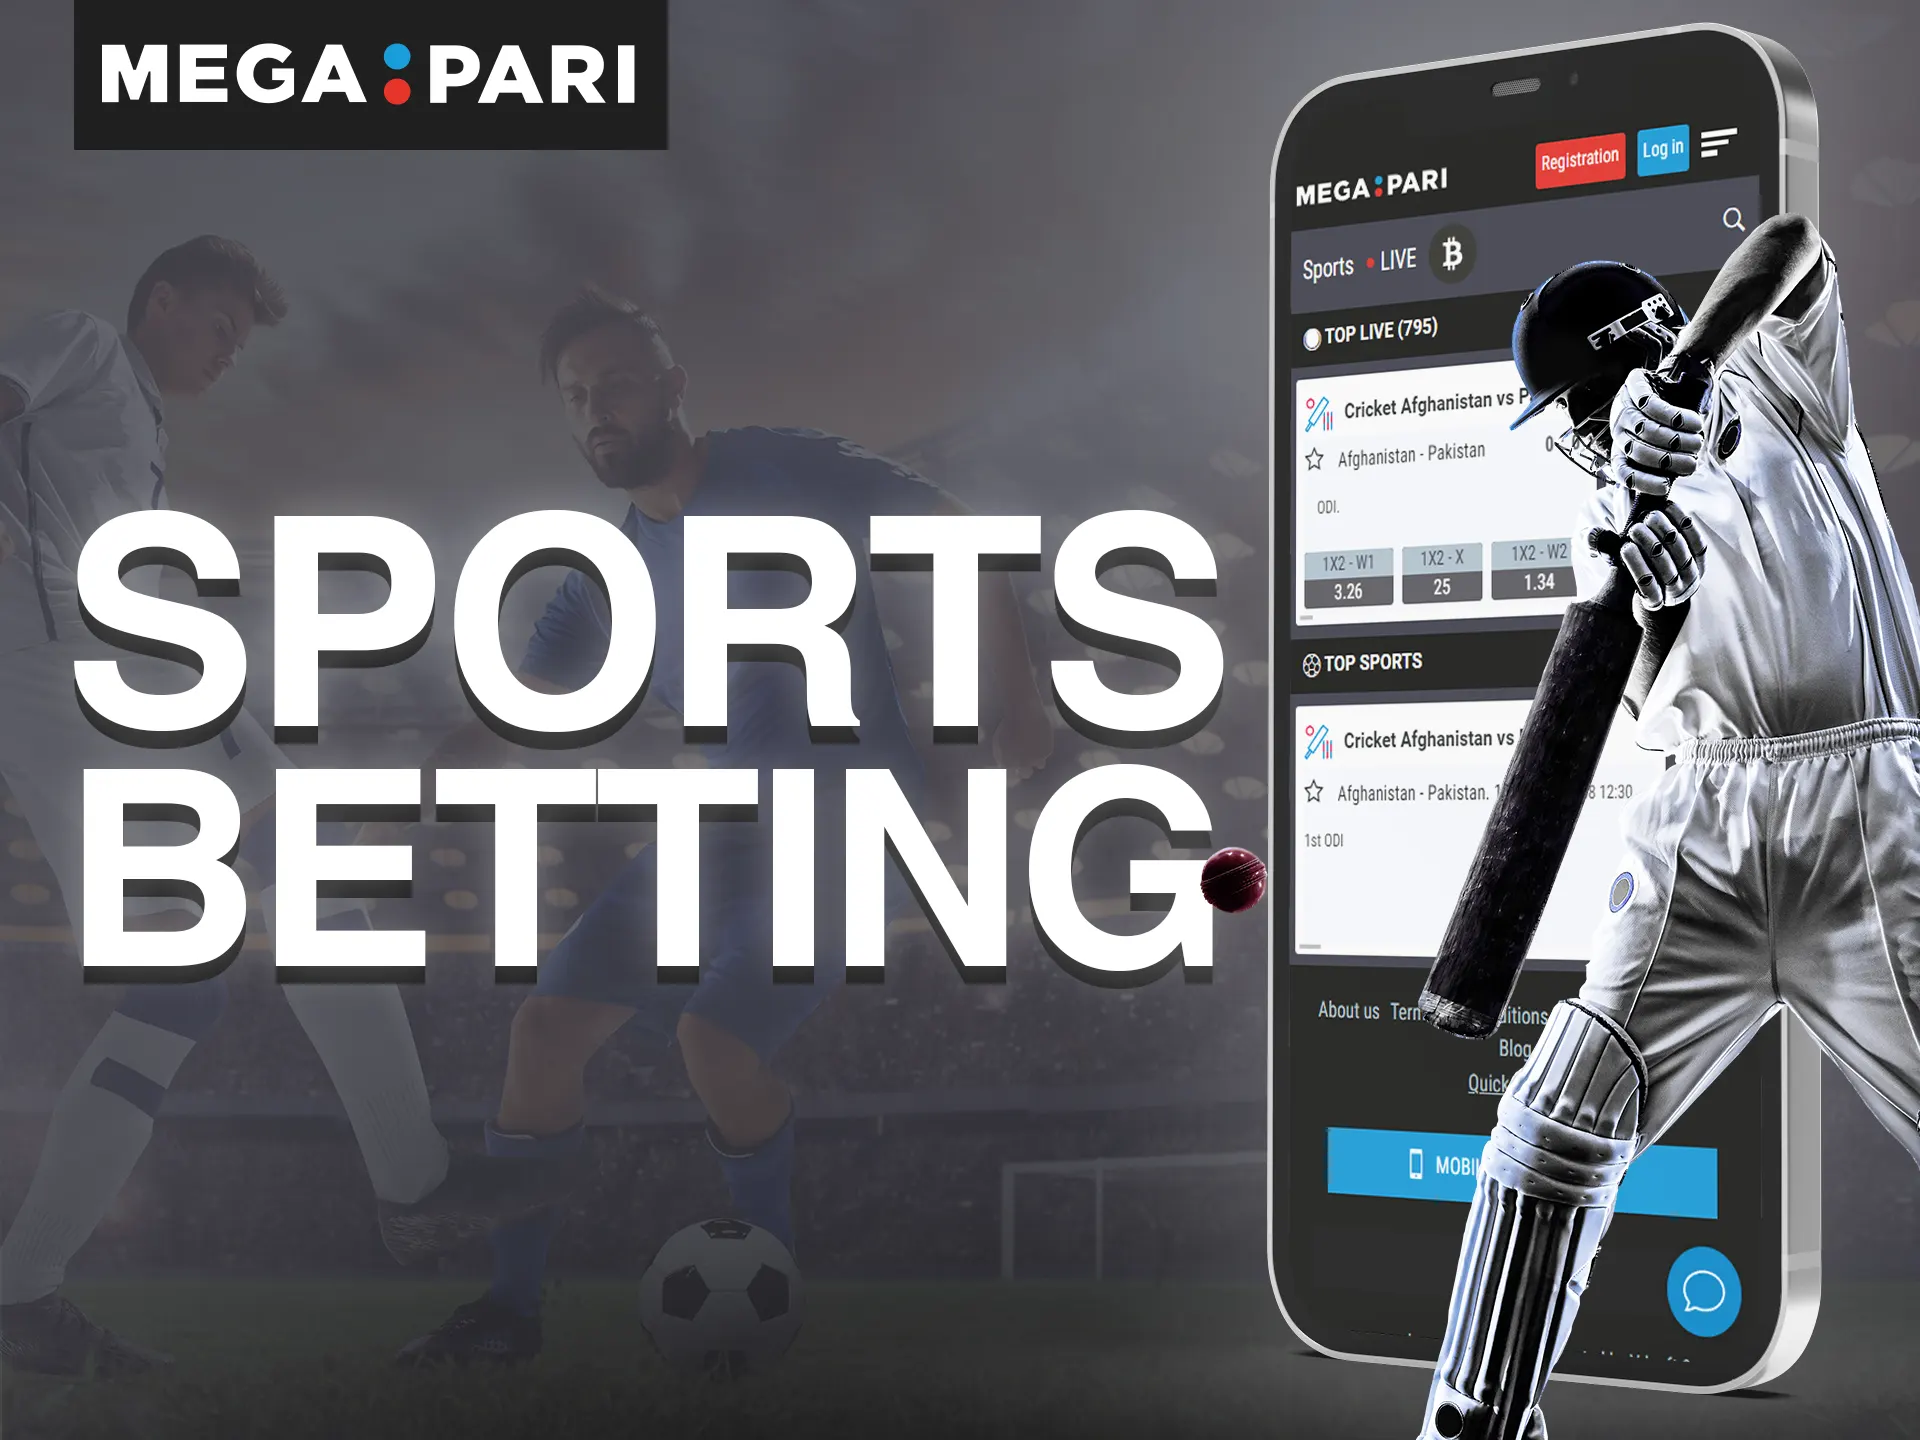 Place your sports bets on the Megapari mobile app.